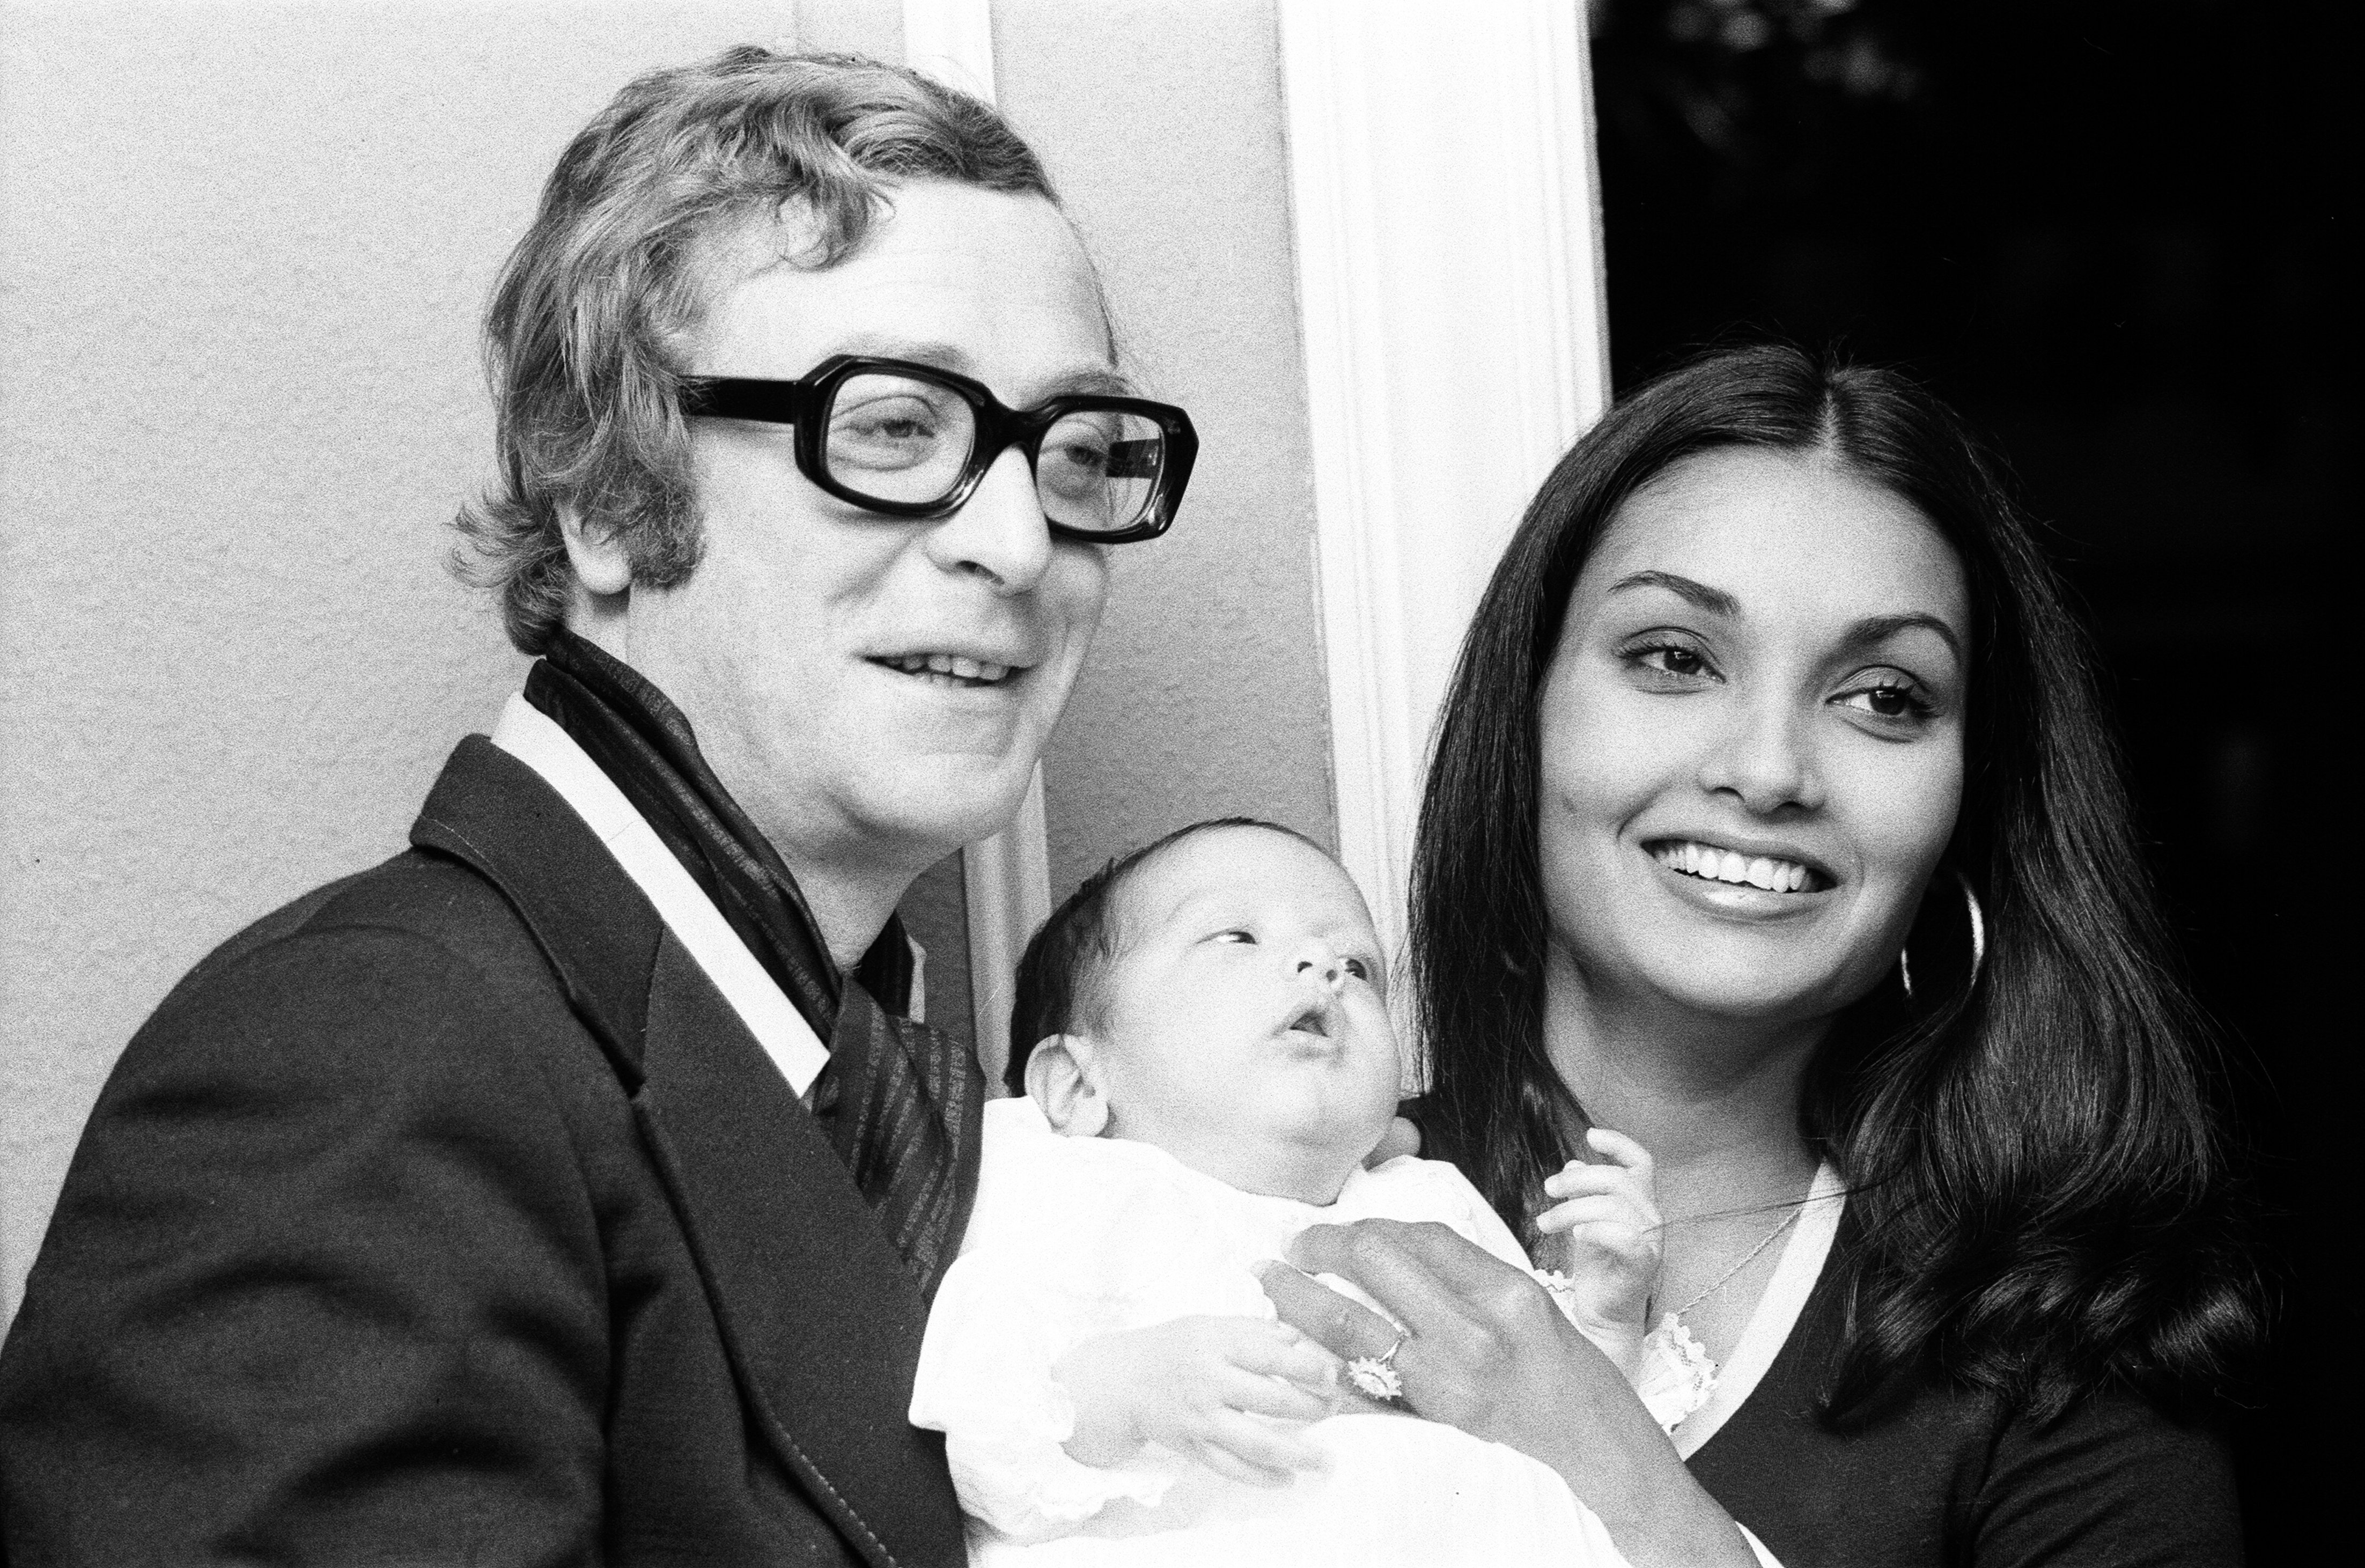 Michael Caine, Shakira Caine, and Natasha Caine at the White Elephant on the River, 1973 | Source: Getty Images